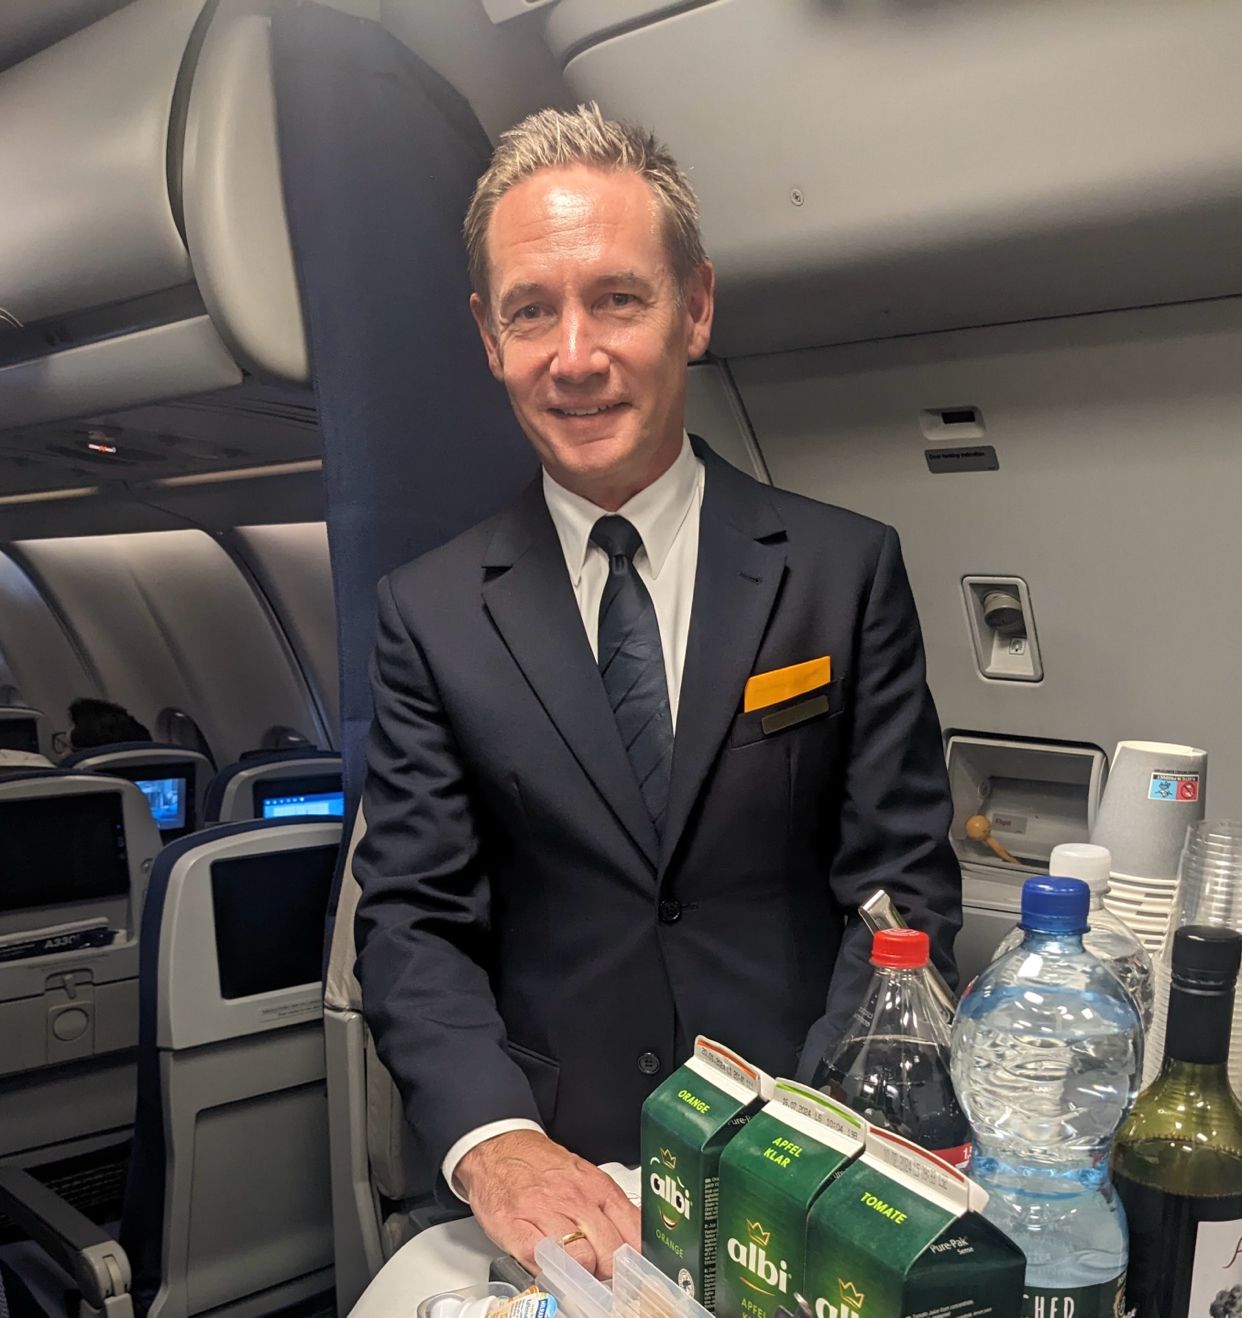 a man in a suit and tie standing in an airplane